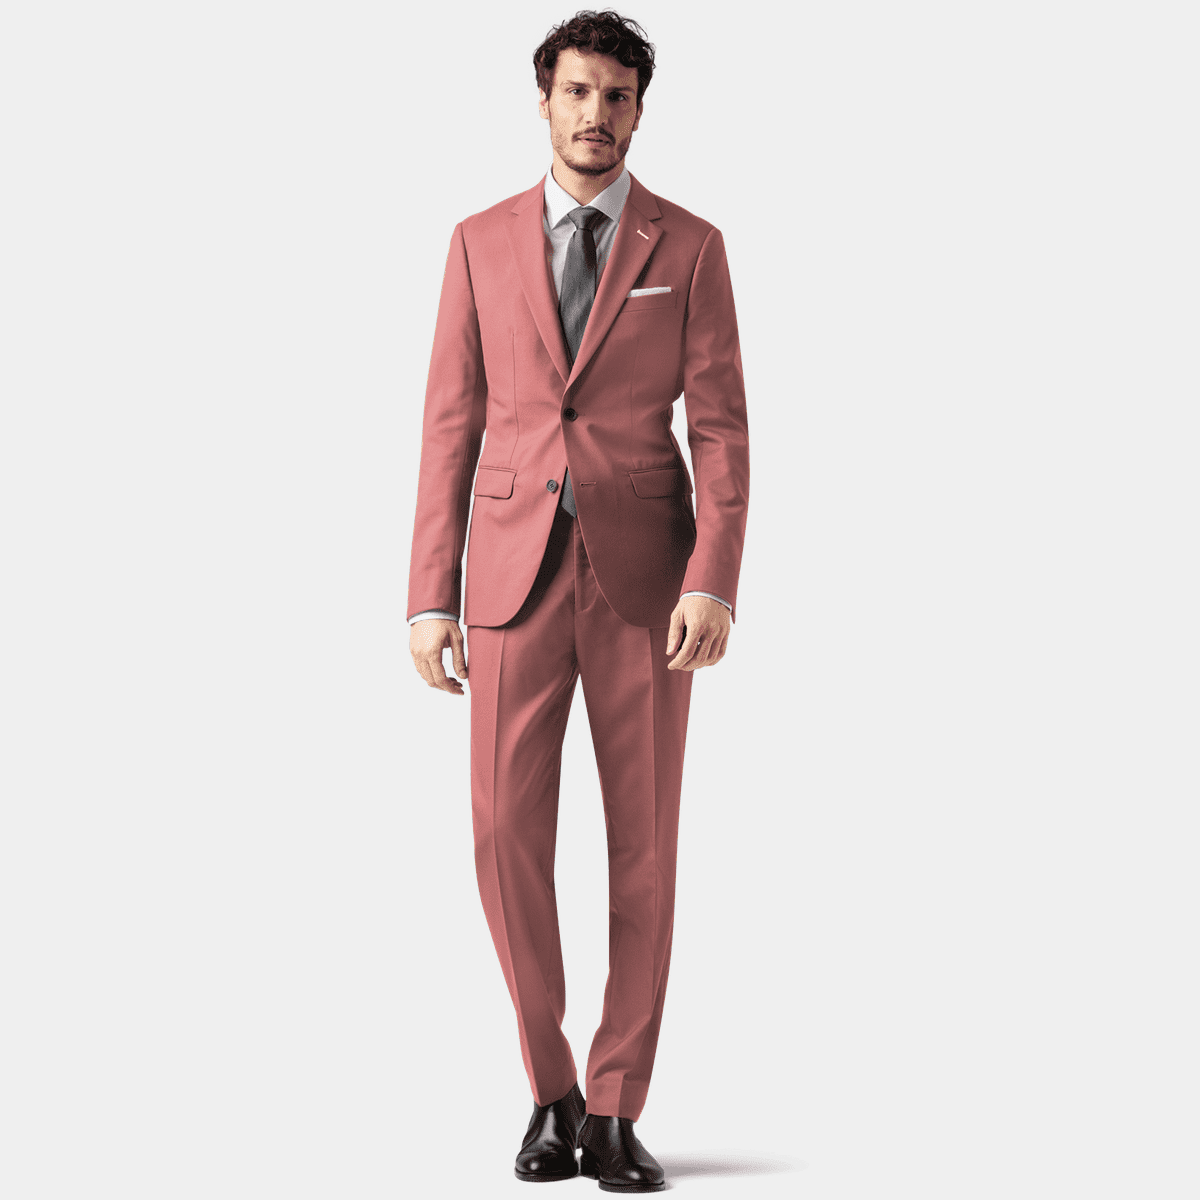 Men wear Pink: All you need to know - Hockerty